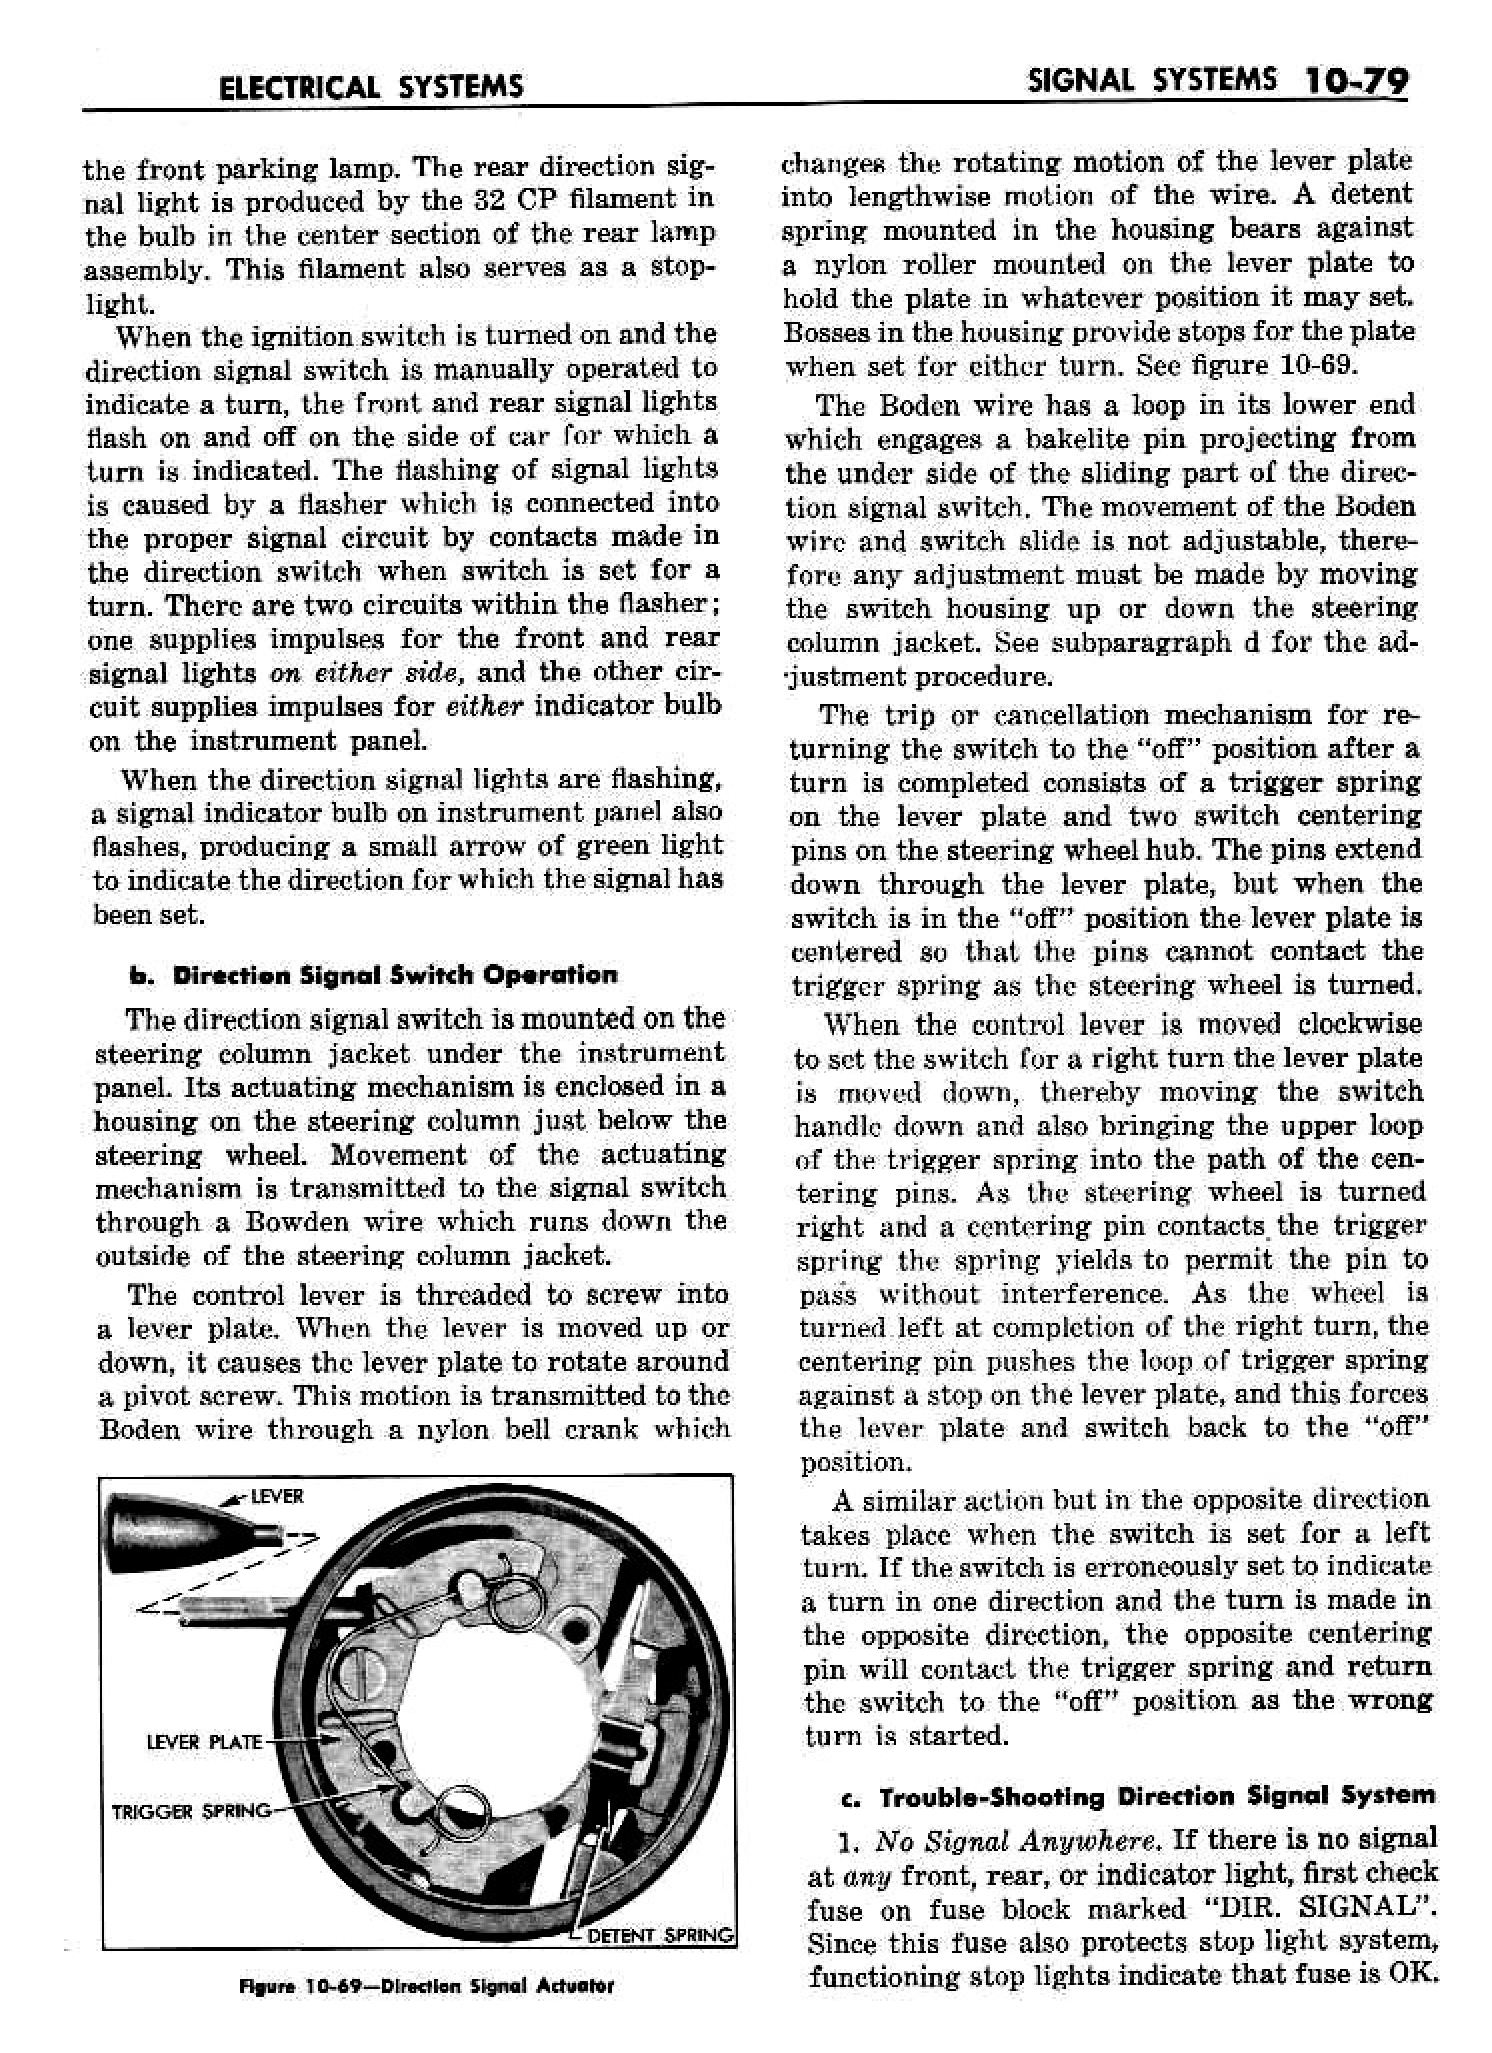 n_11 1958 Buick Shop Manual - Electrical Systems_79.jpg